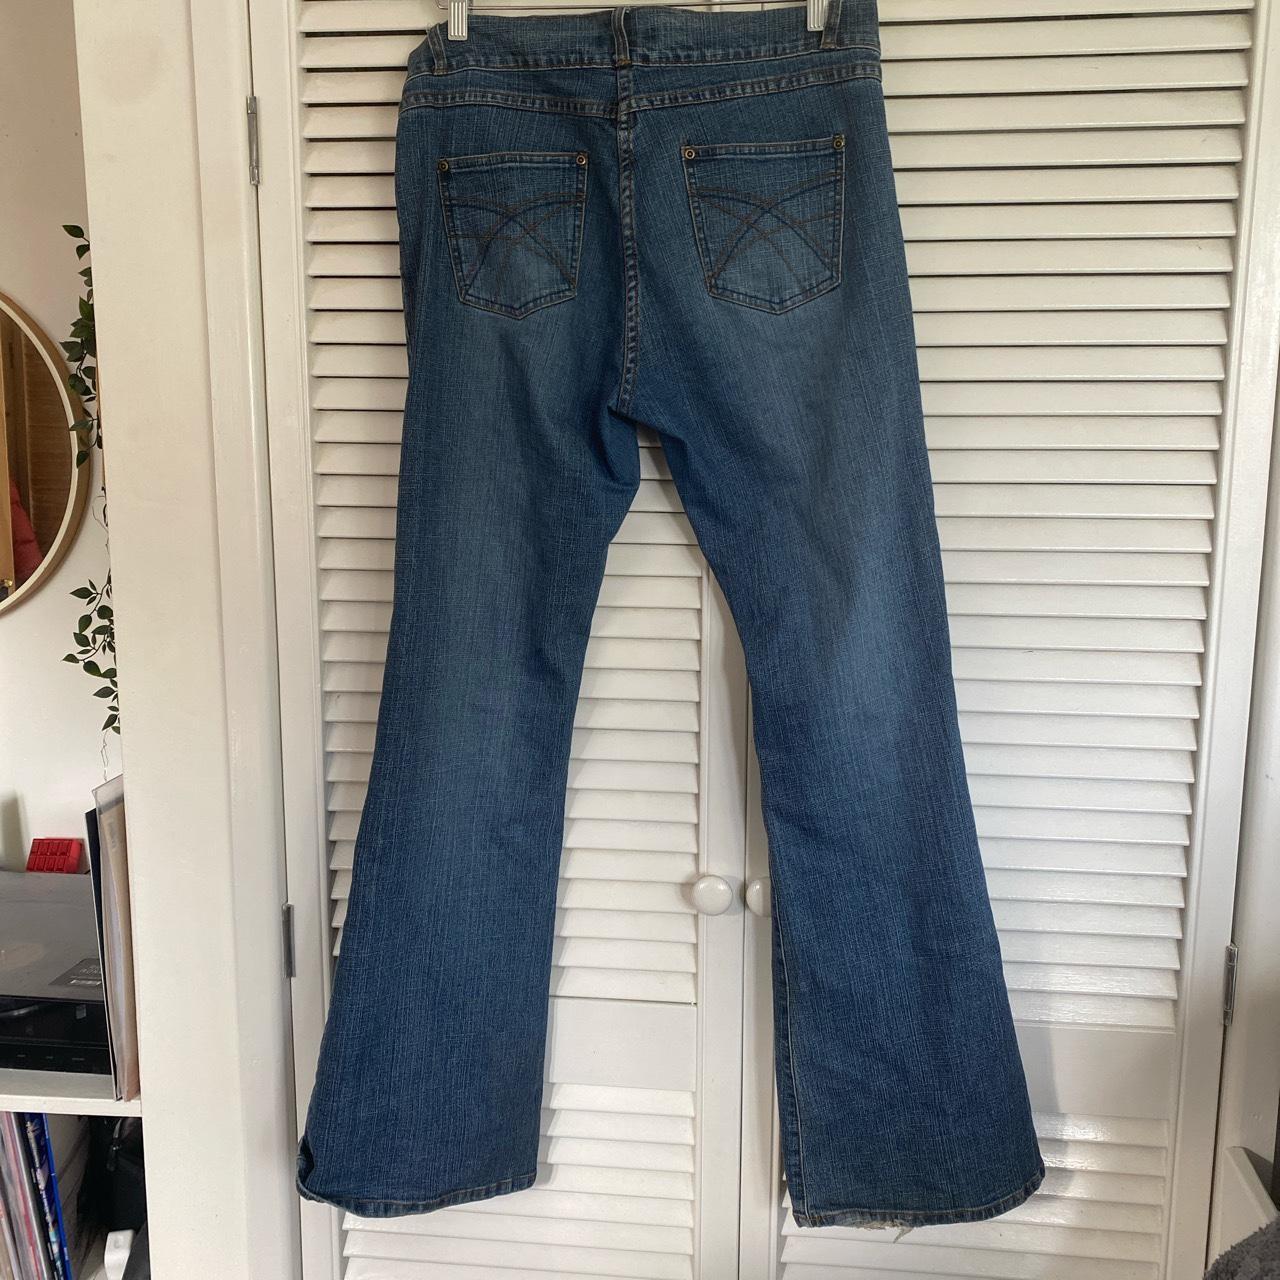 Bootcut jeans 90s/ 00s vintage boot cut jeans in a... - Depop